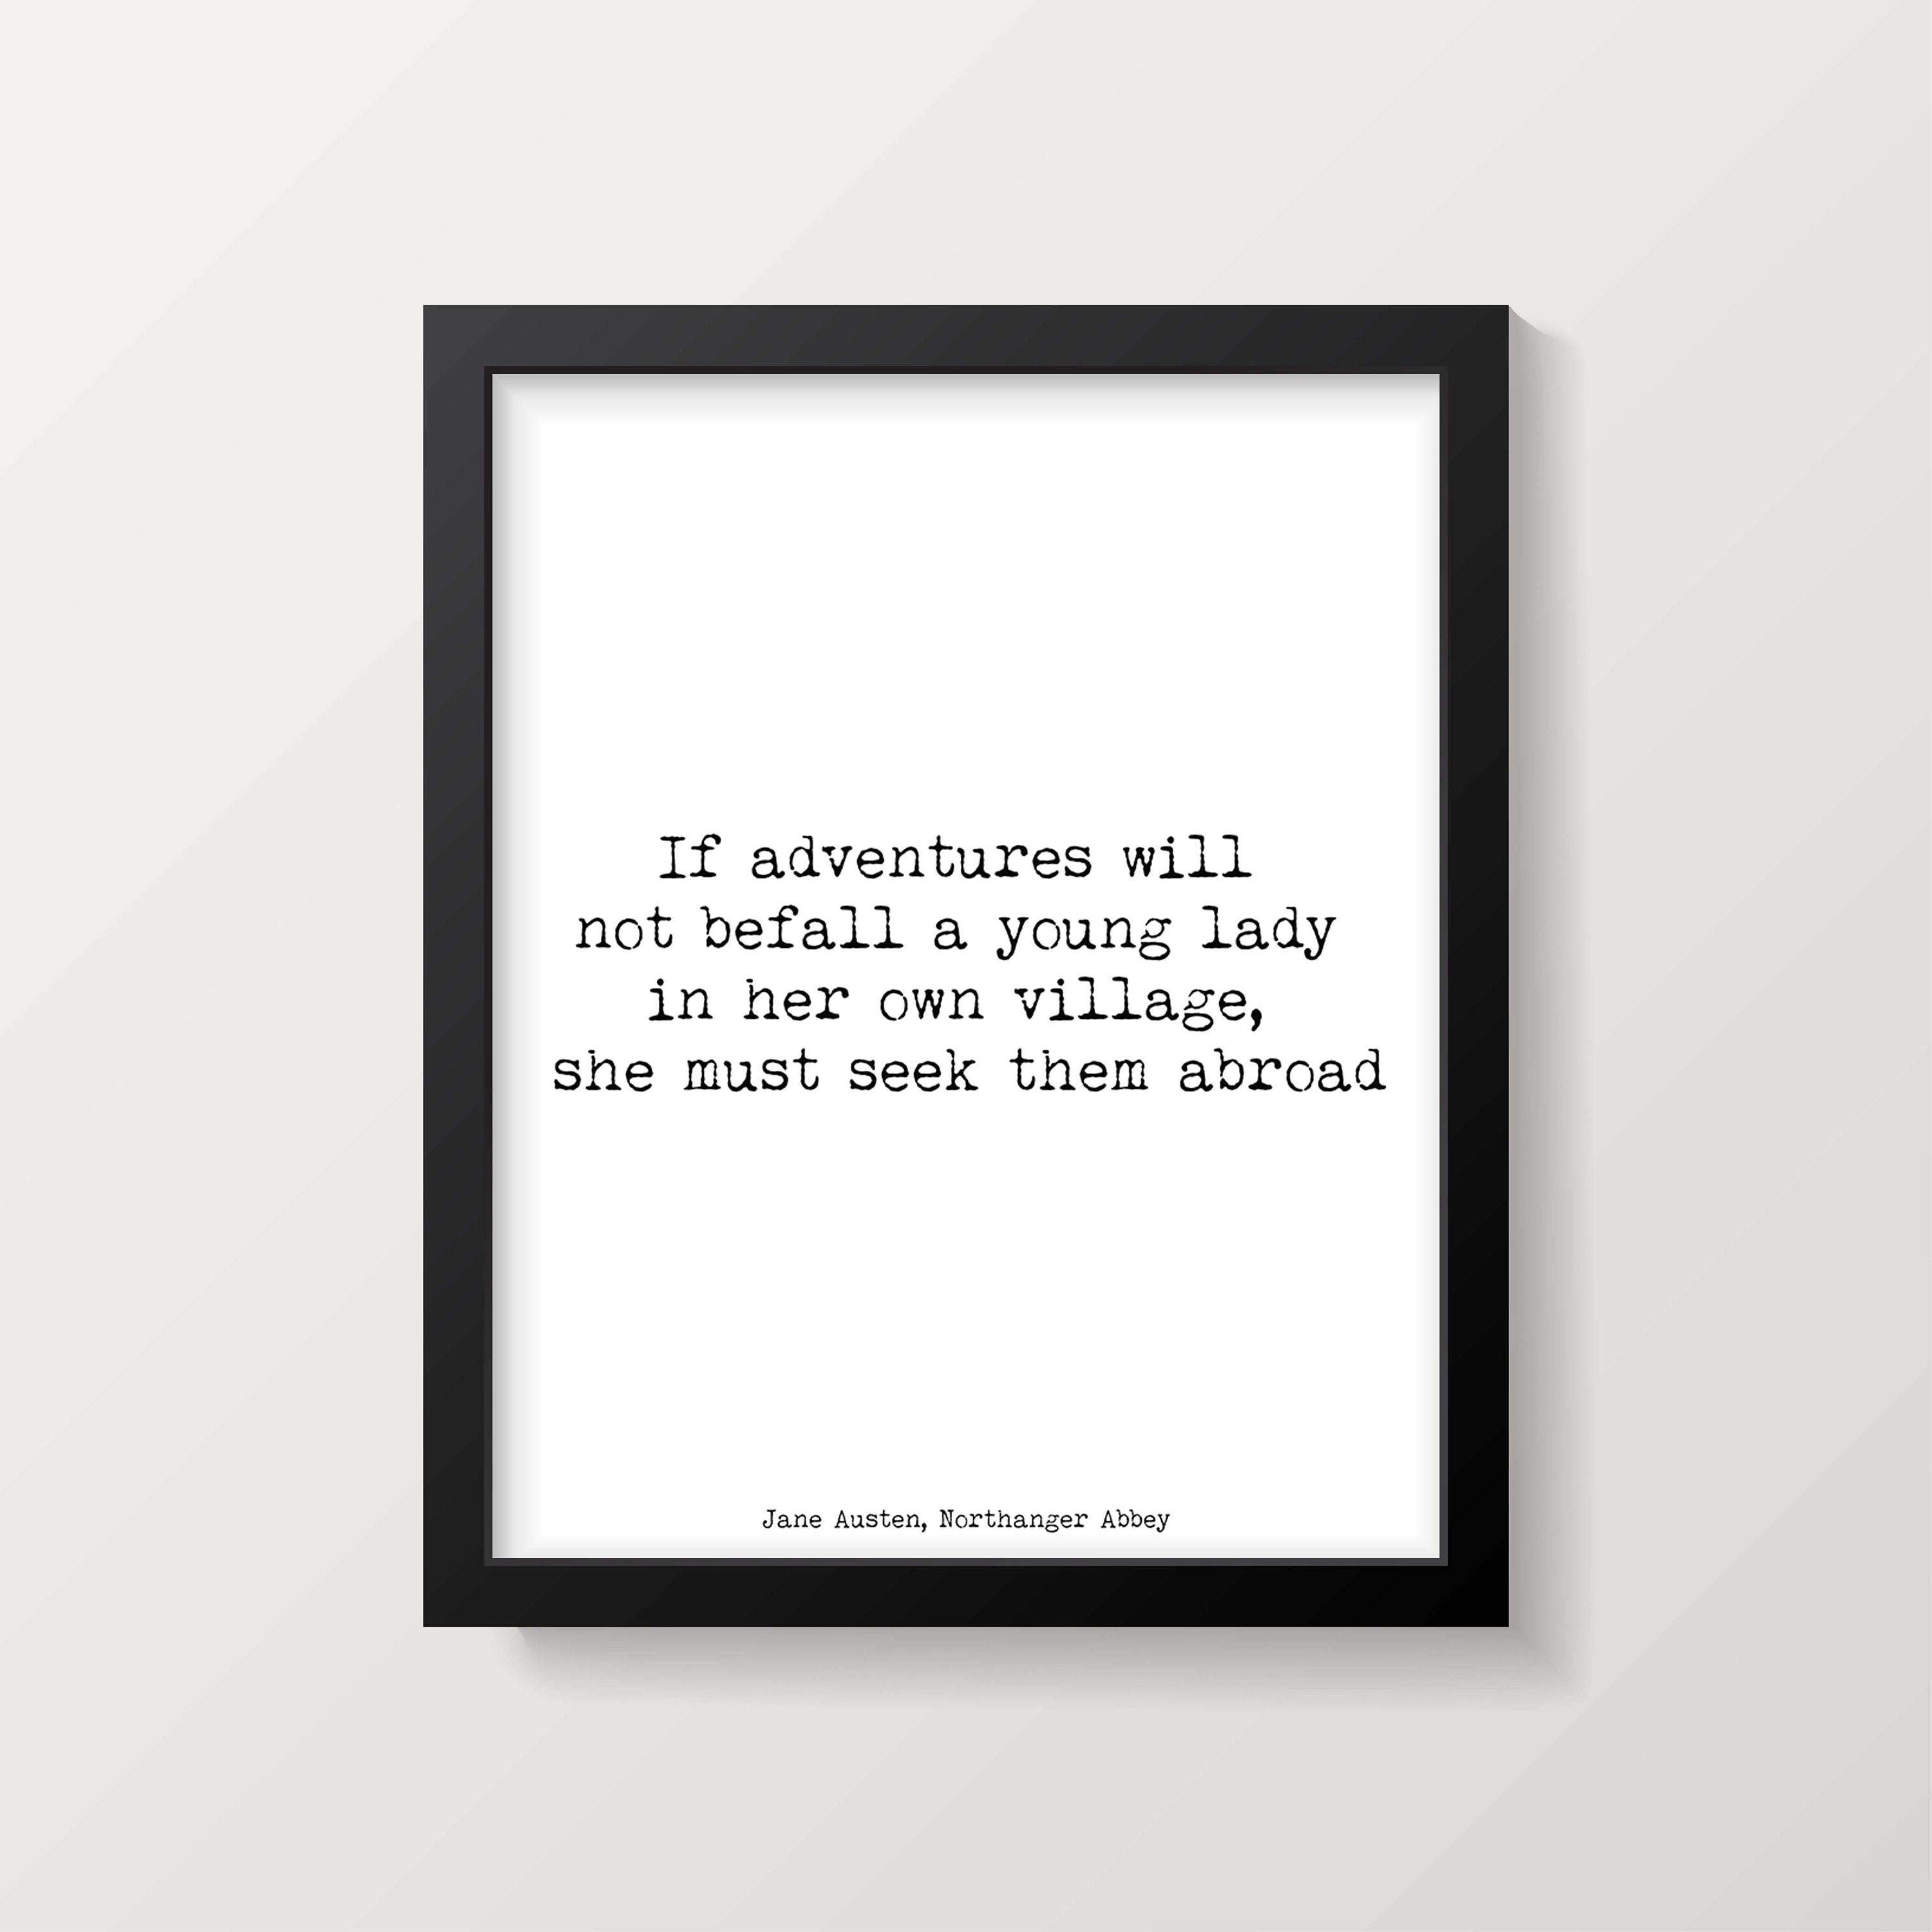 Jane Austen Northanger Abbey Quote Print, Unframed Adventure Travel Literary Art in Black & White If adventures will not befall a young lady